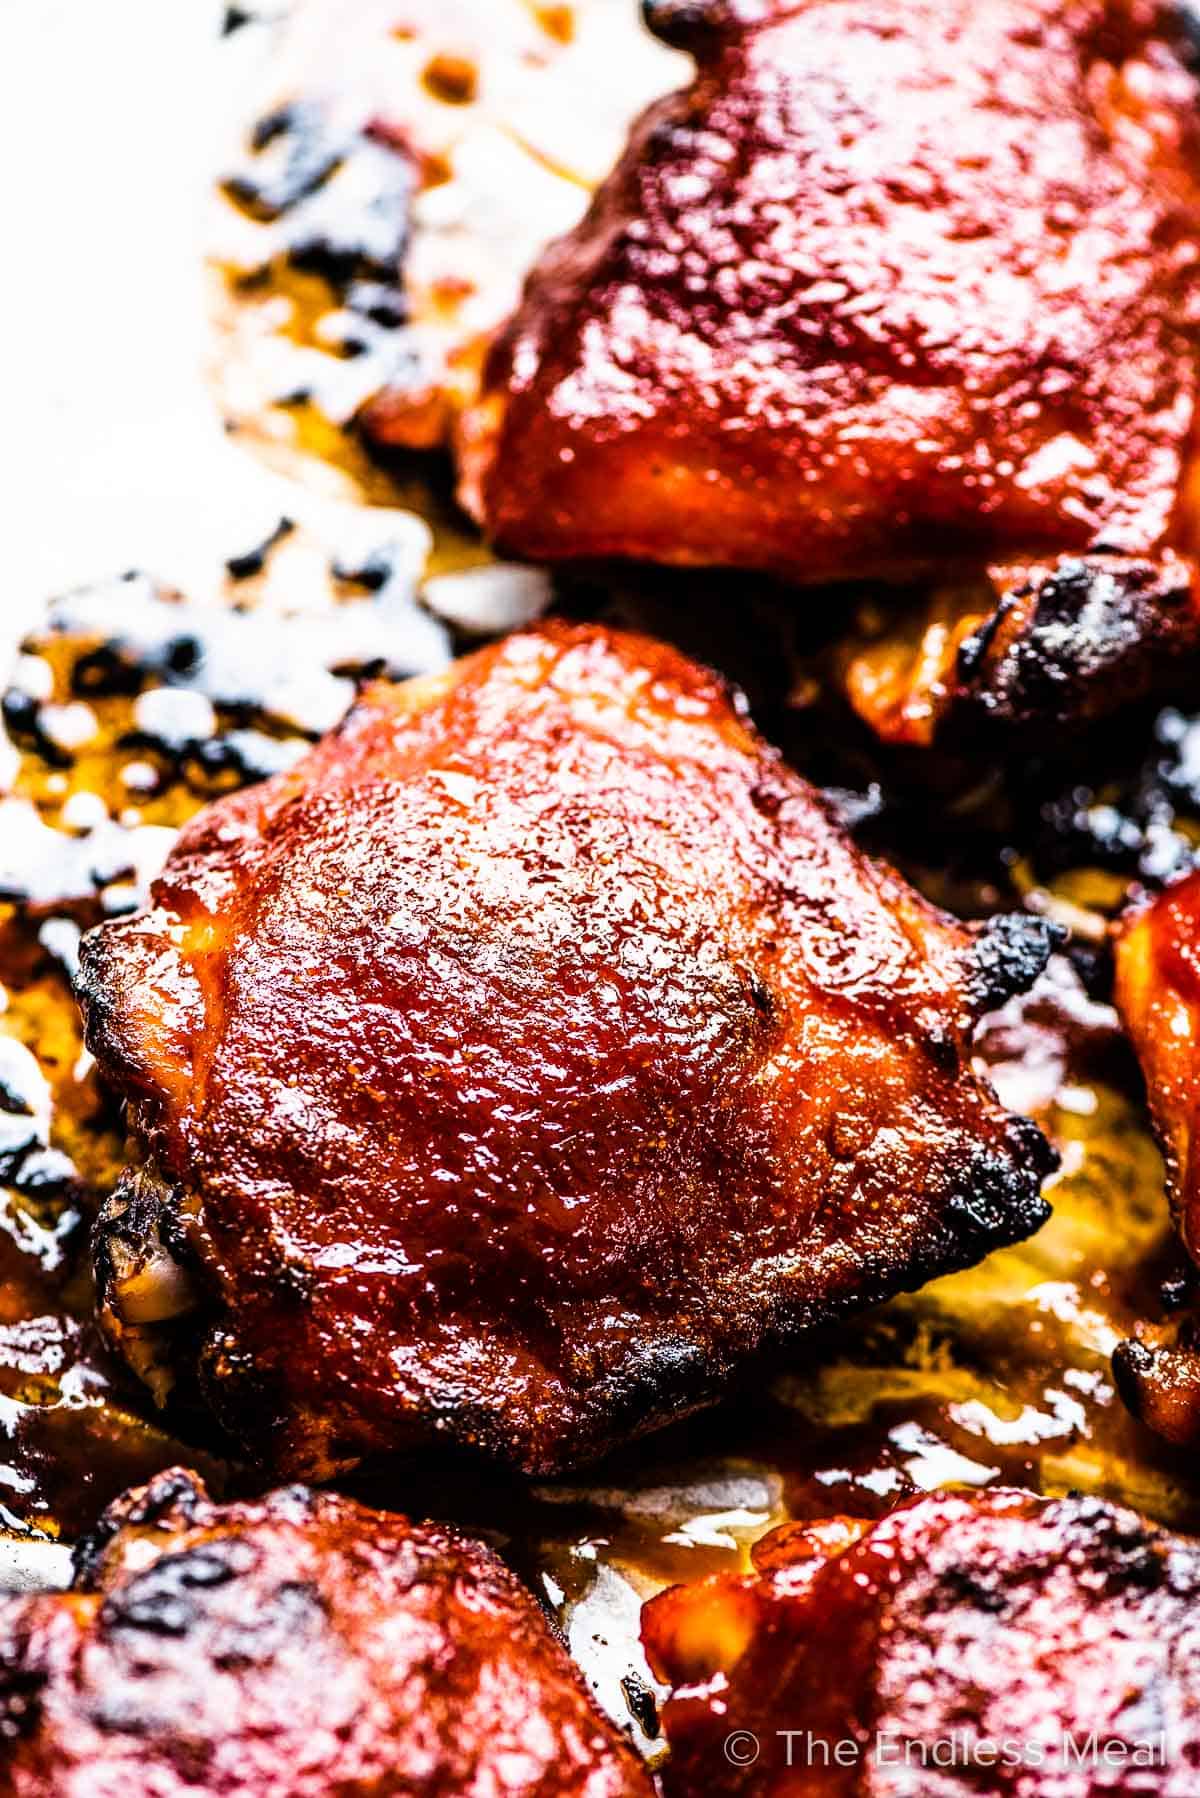 A close up of the bbq chicken on a baking sheet.